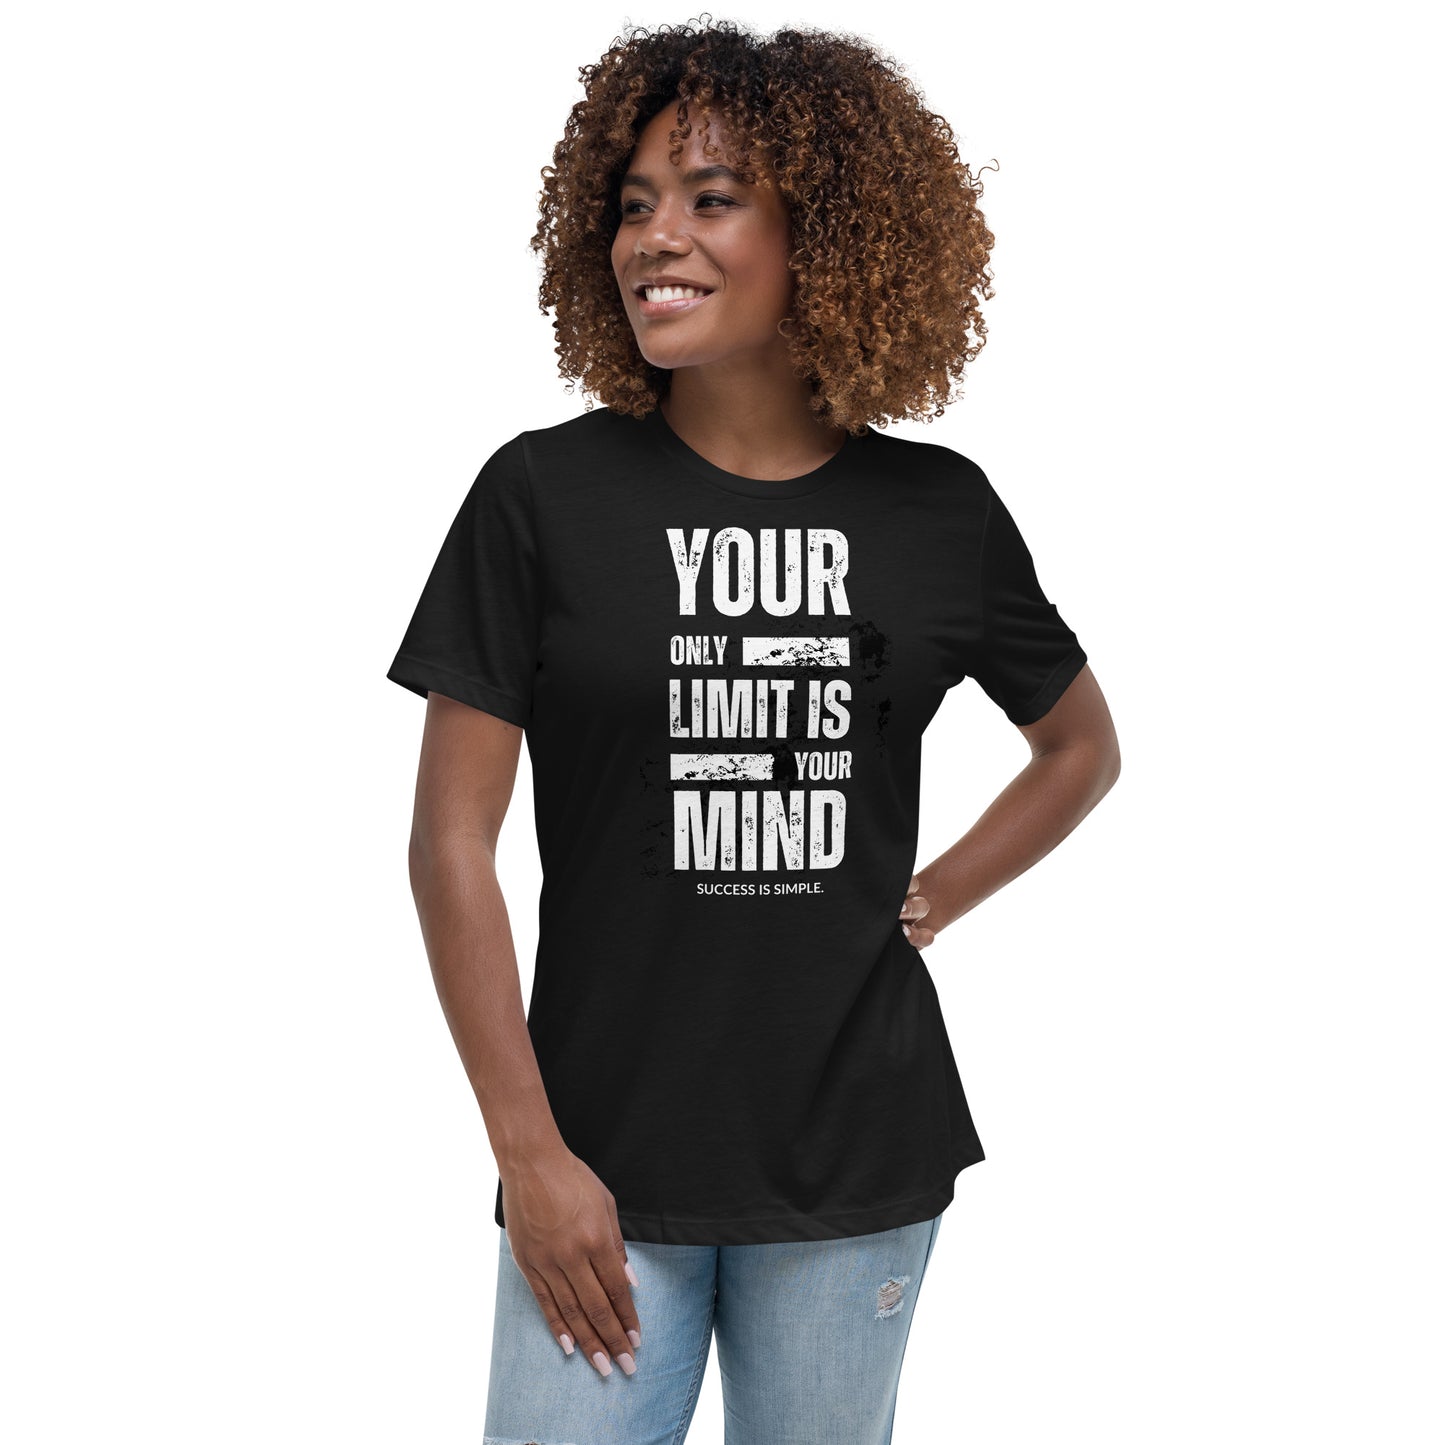 Your Only Limit Is Your Mind - Women's Relaxed T-Shirt